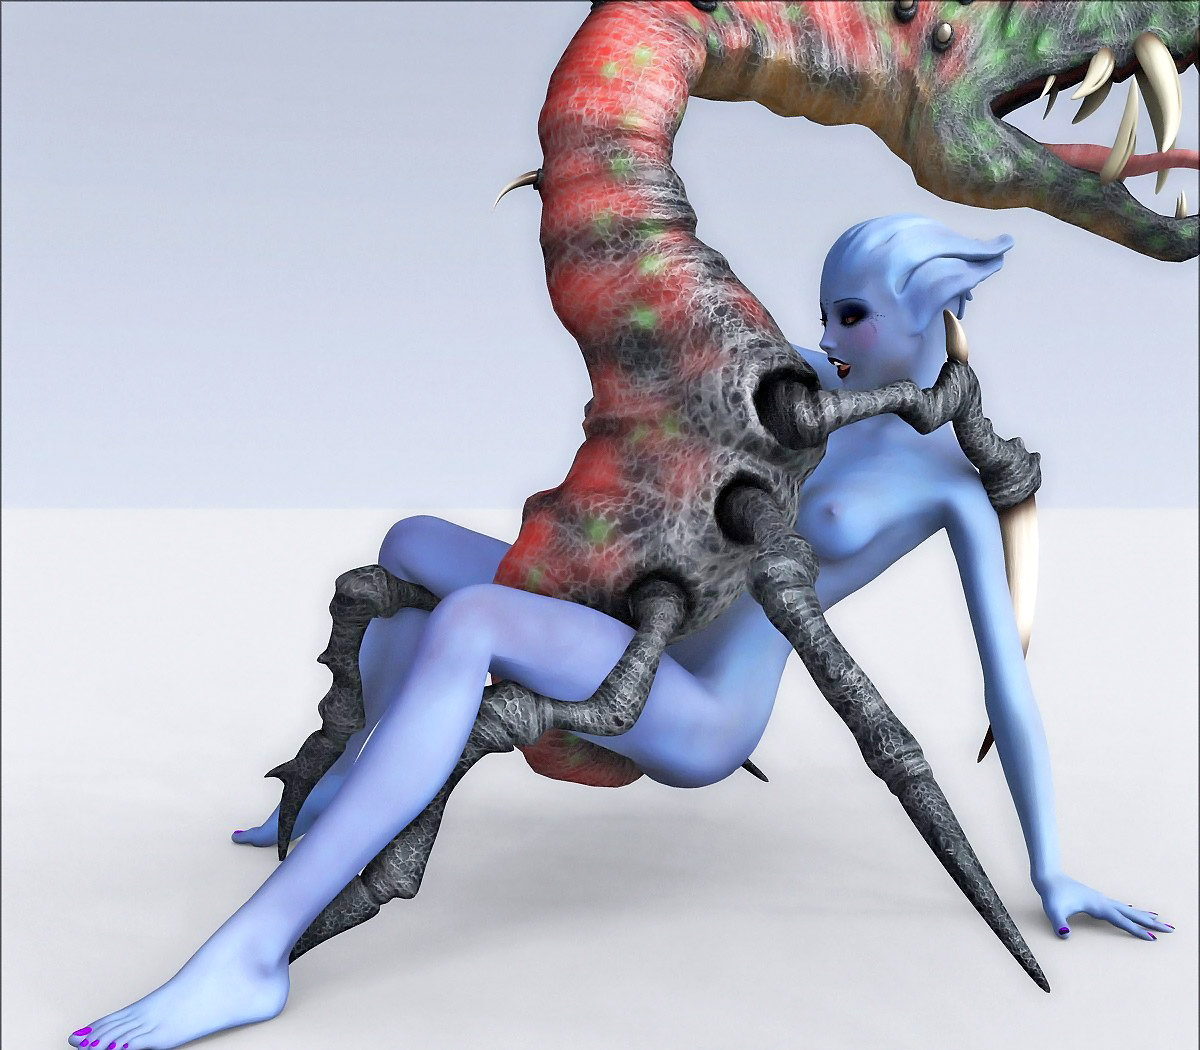 chick takes on big insect during 3d cartoon monster sex | 3dwerewolfporn.com